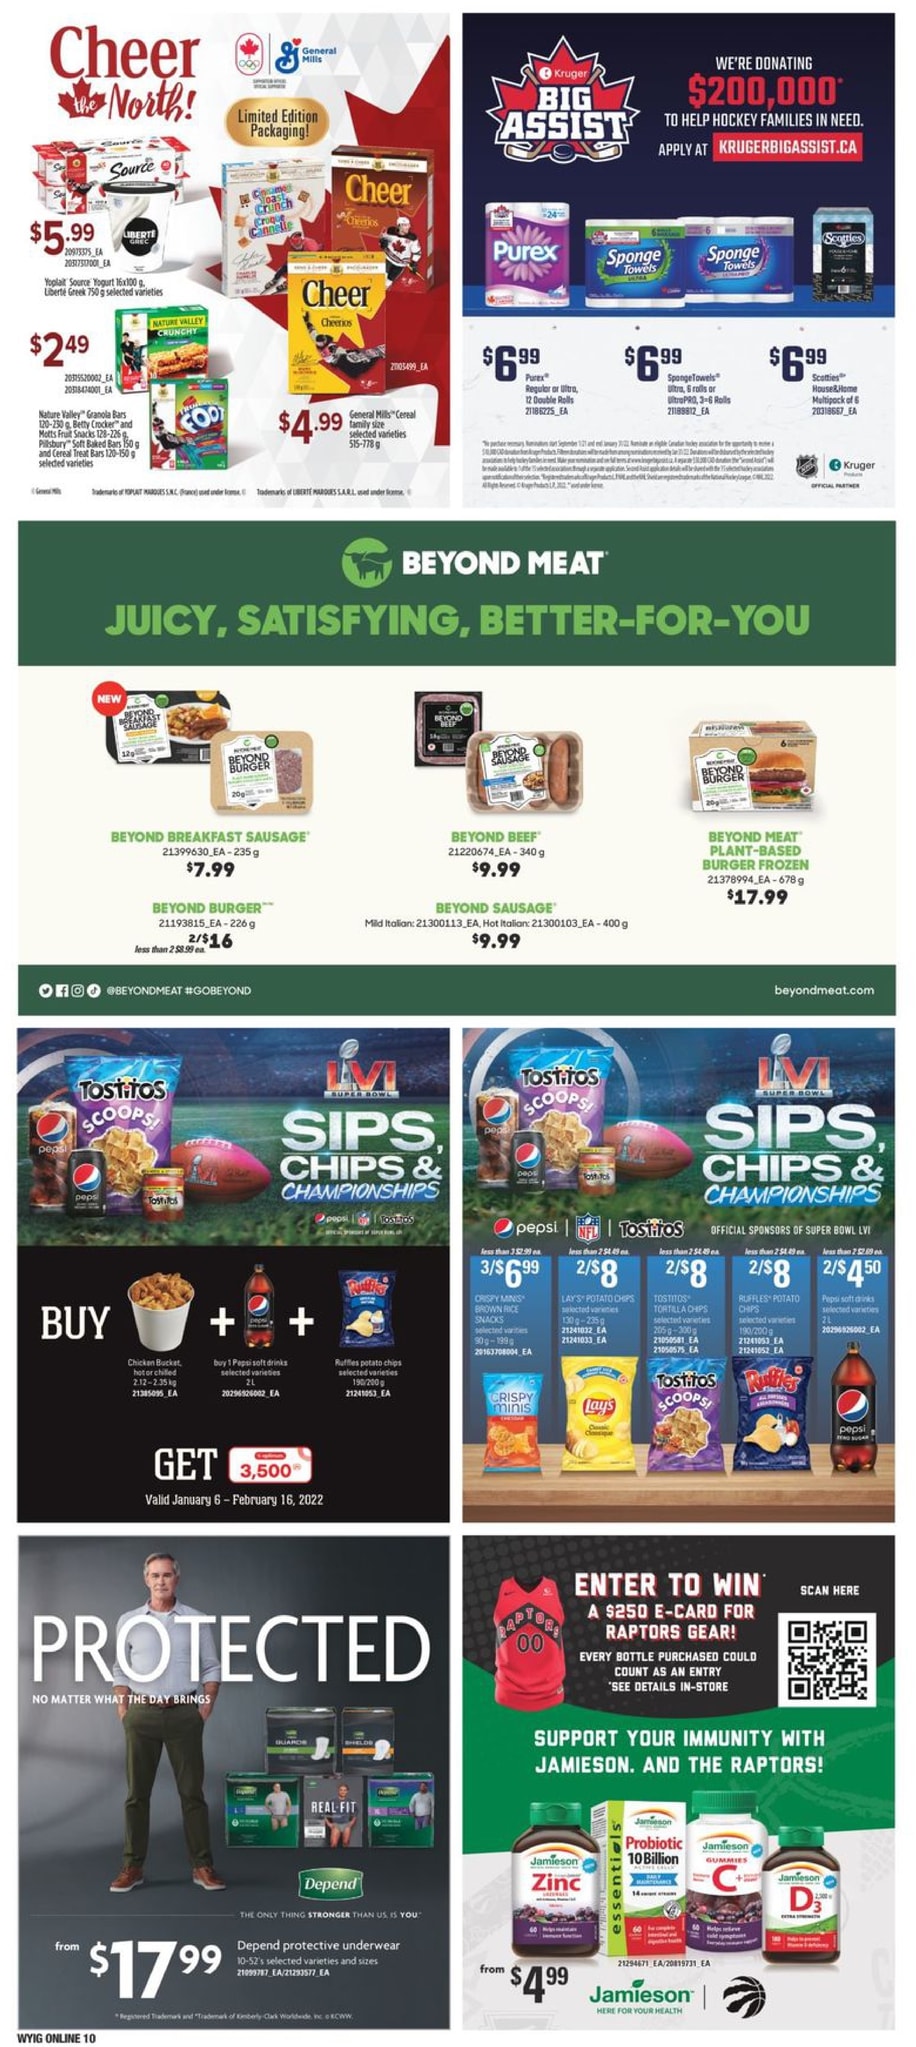 Independent British Columbia - Weekly Flyer Specials - Page 15